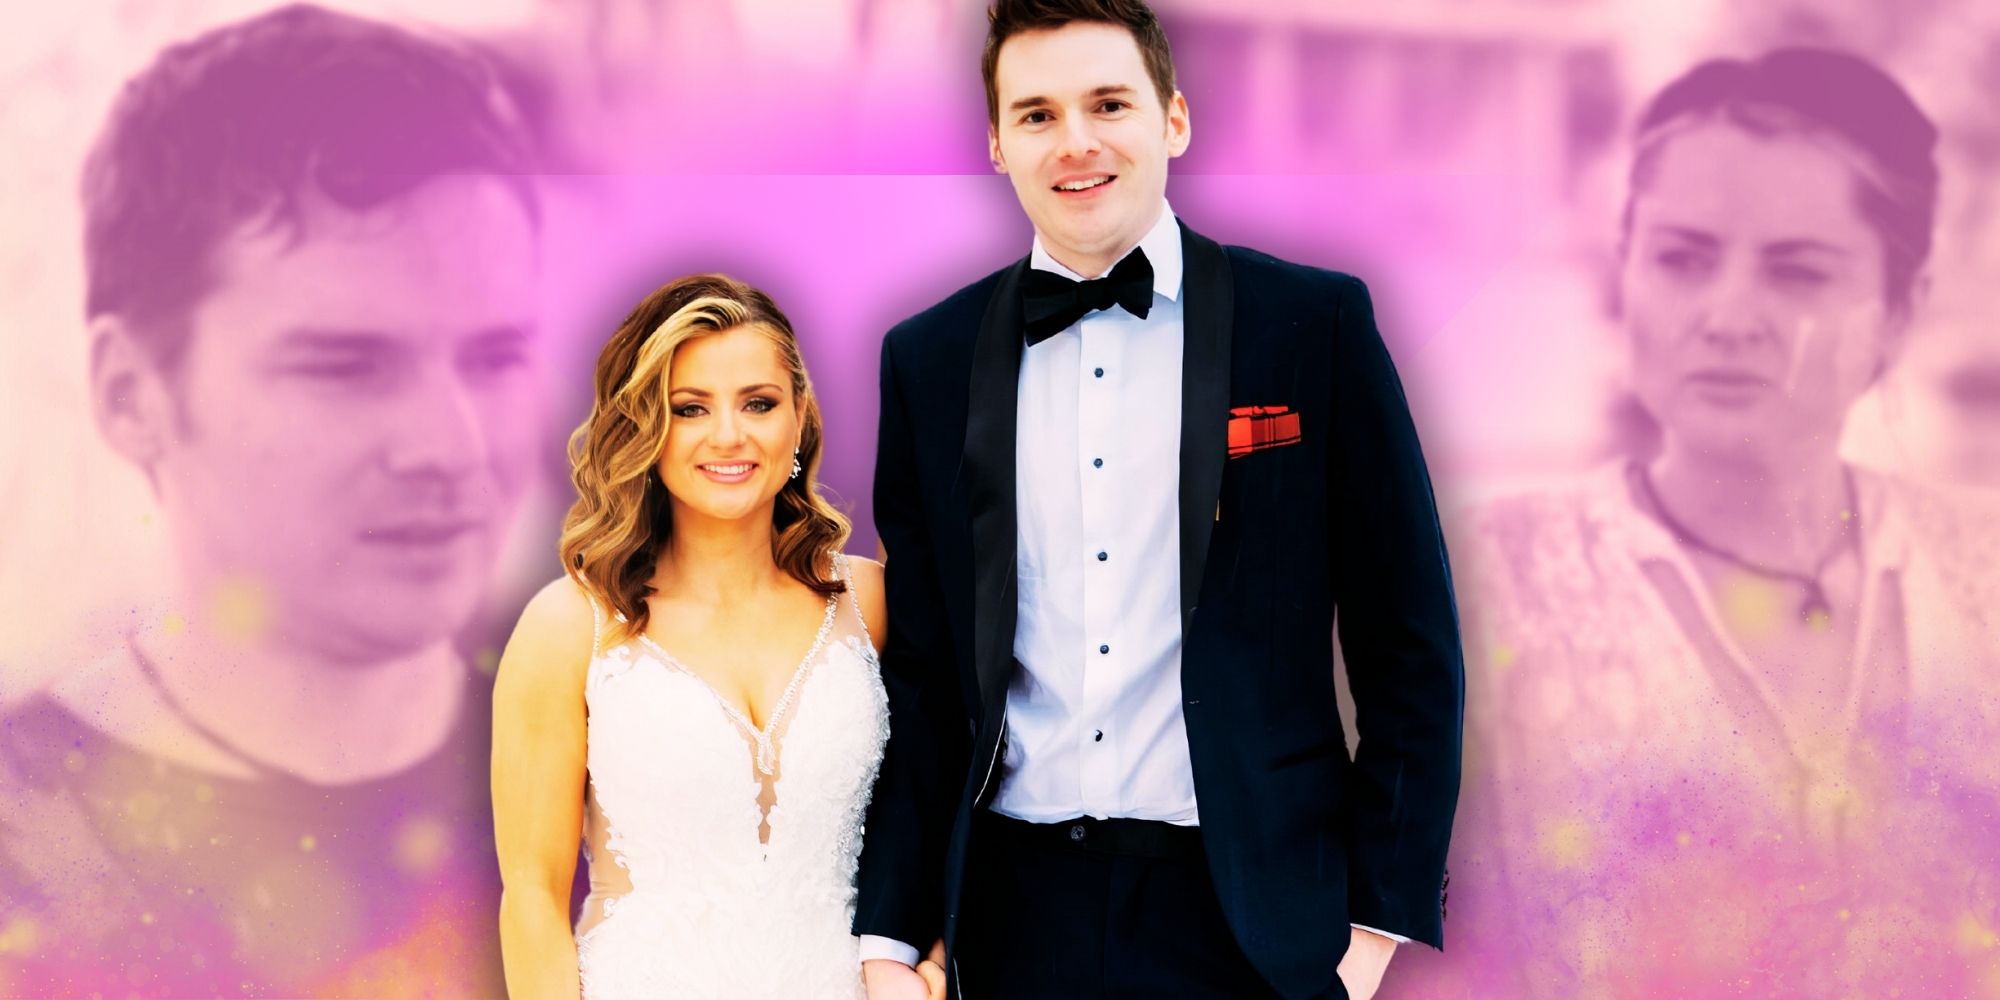 Clare Kerr and Cameron Frazer from Married at First Sight season 17 wedding photo and pink background photo montage